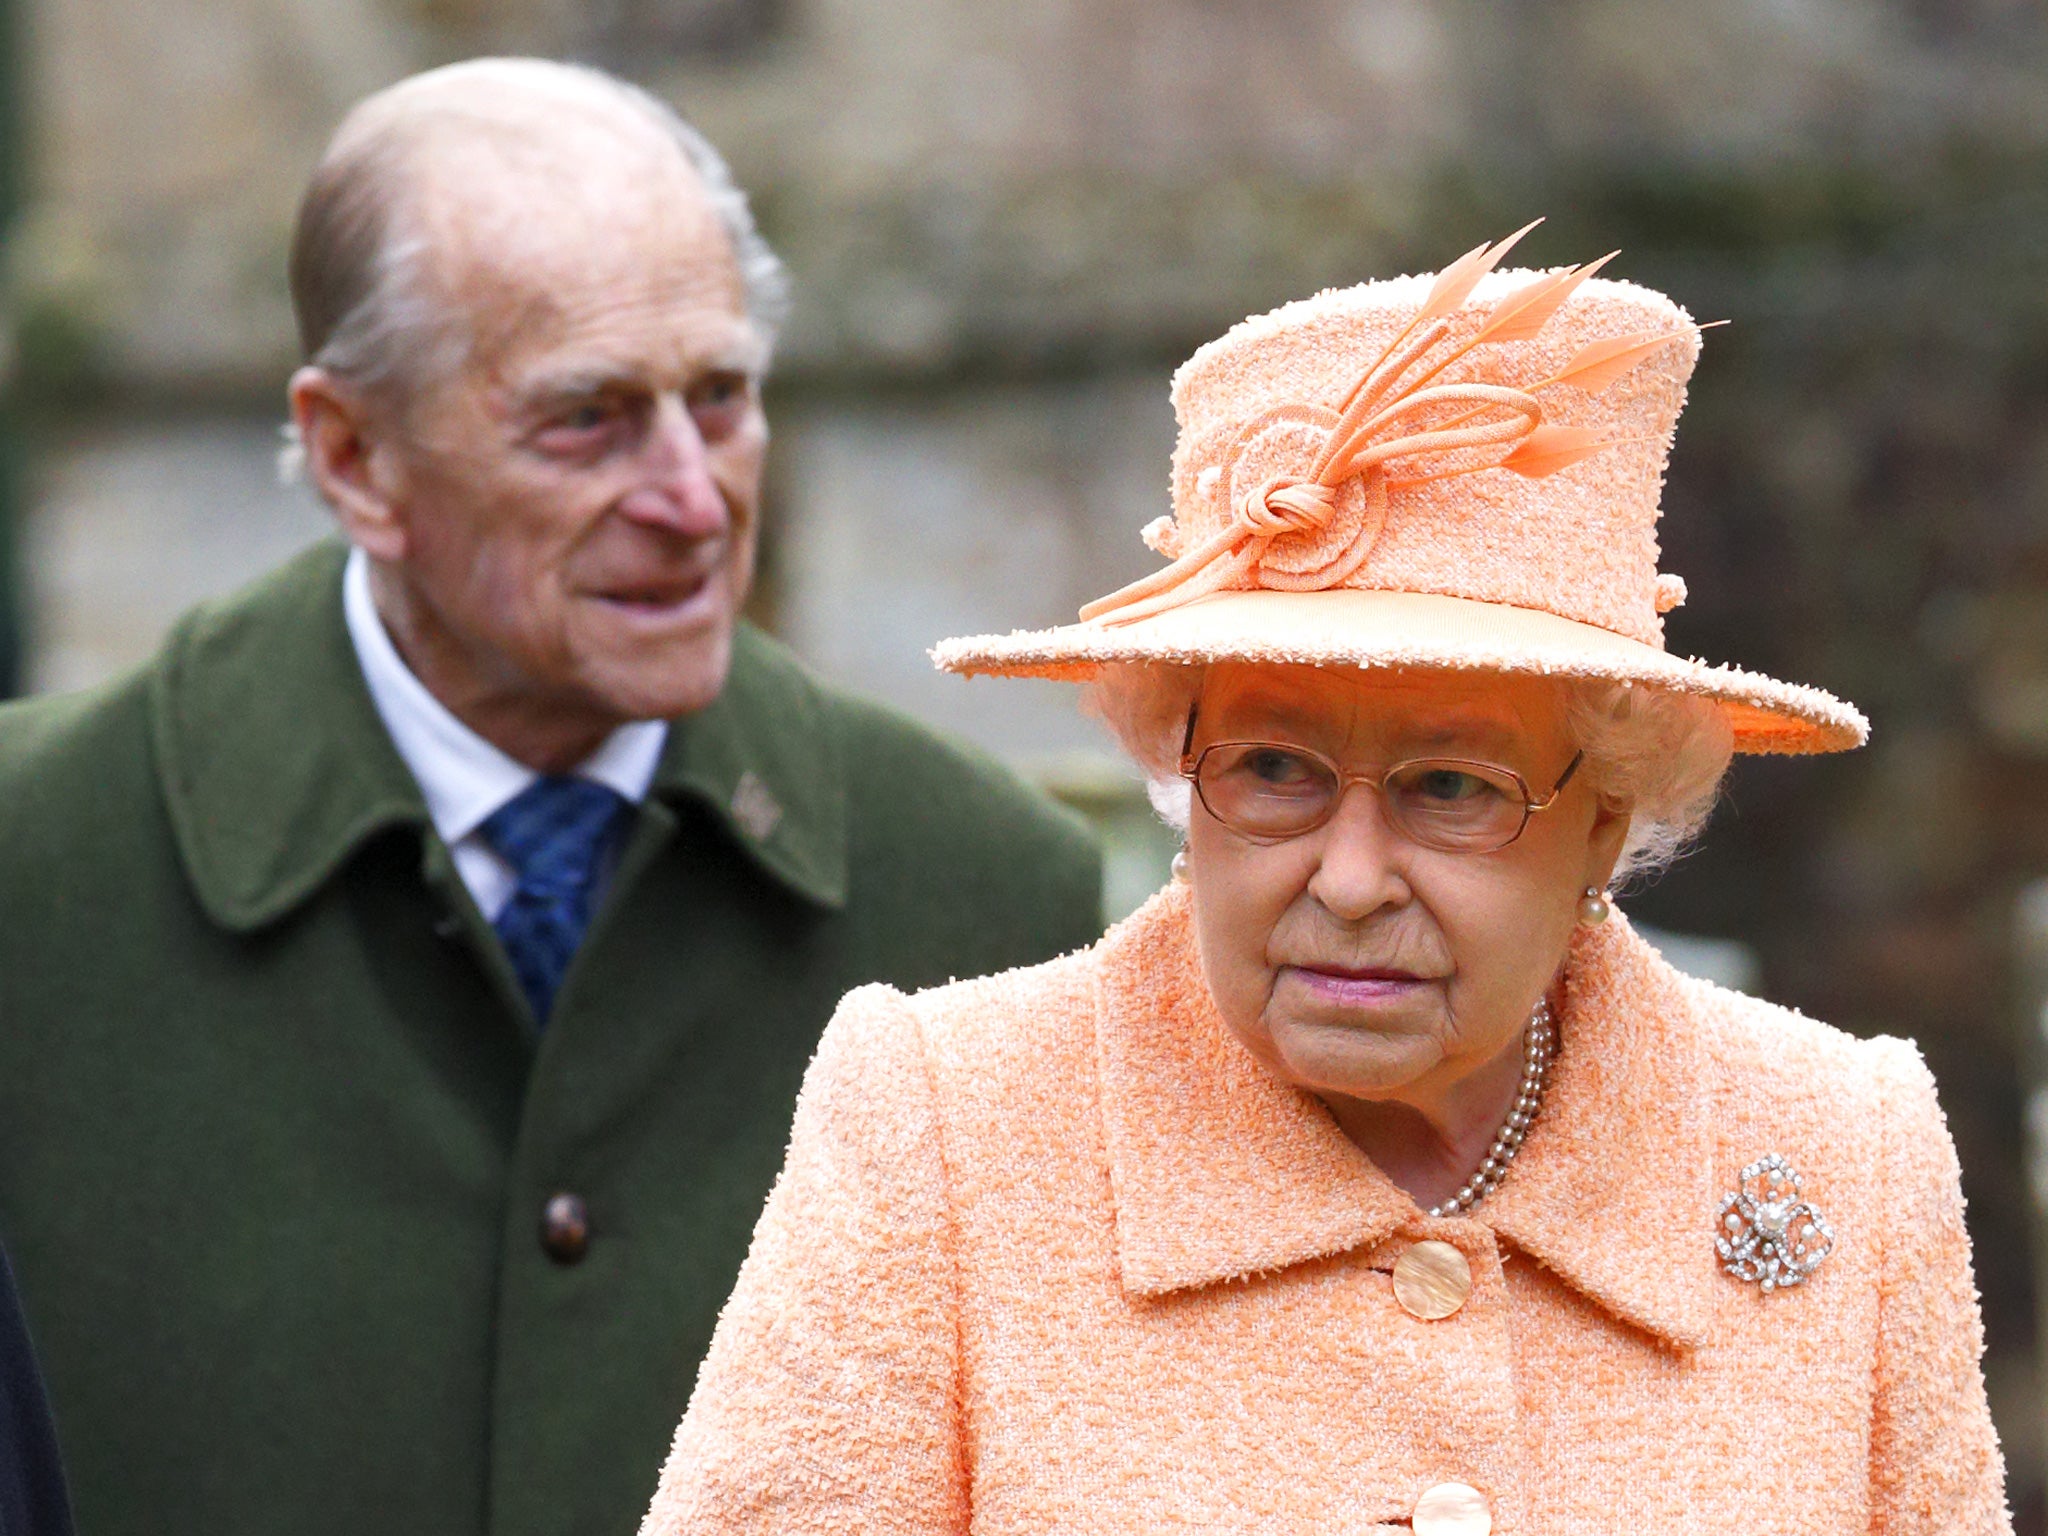 The Queen and Duke of Edinburgh are to make a three-day state visit to France in June